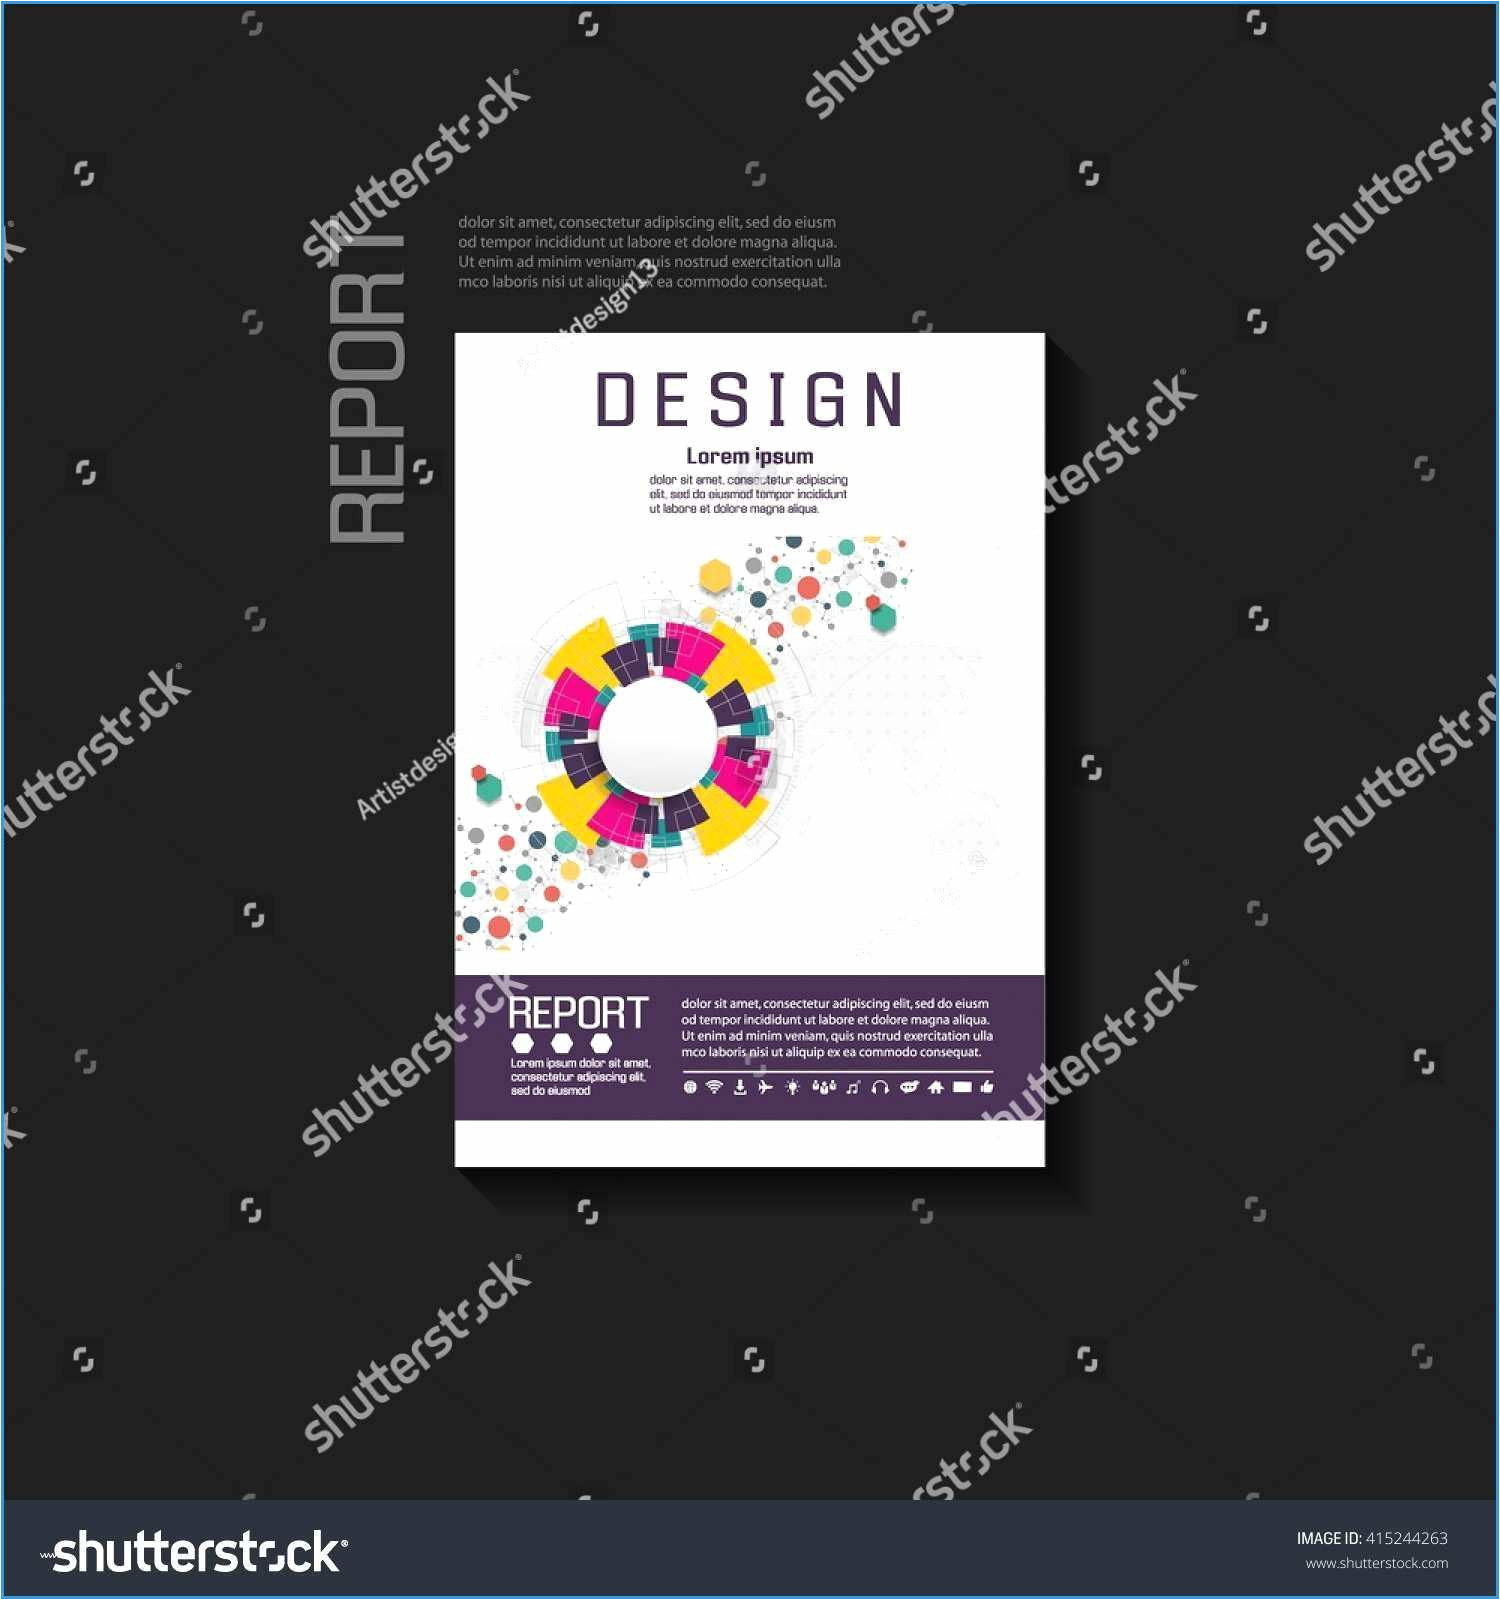 free printable religious business card templates marvelous of graphic designer business card templates of graphic designer business card templates jpg